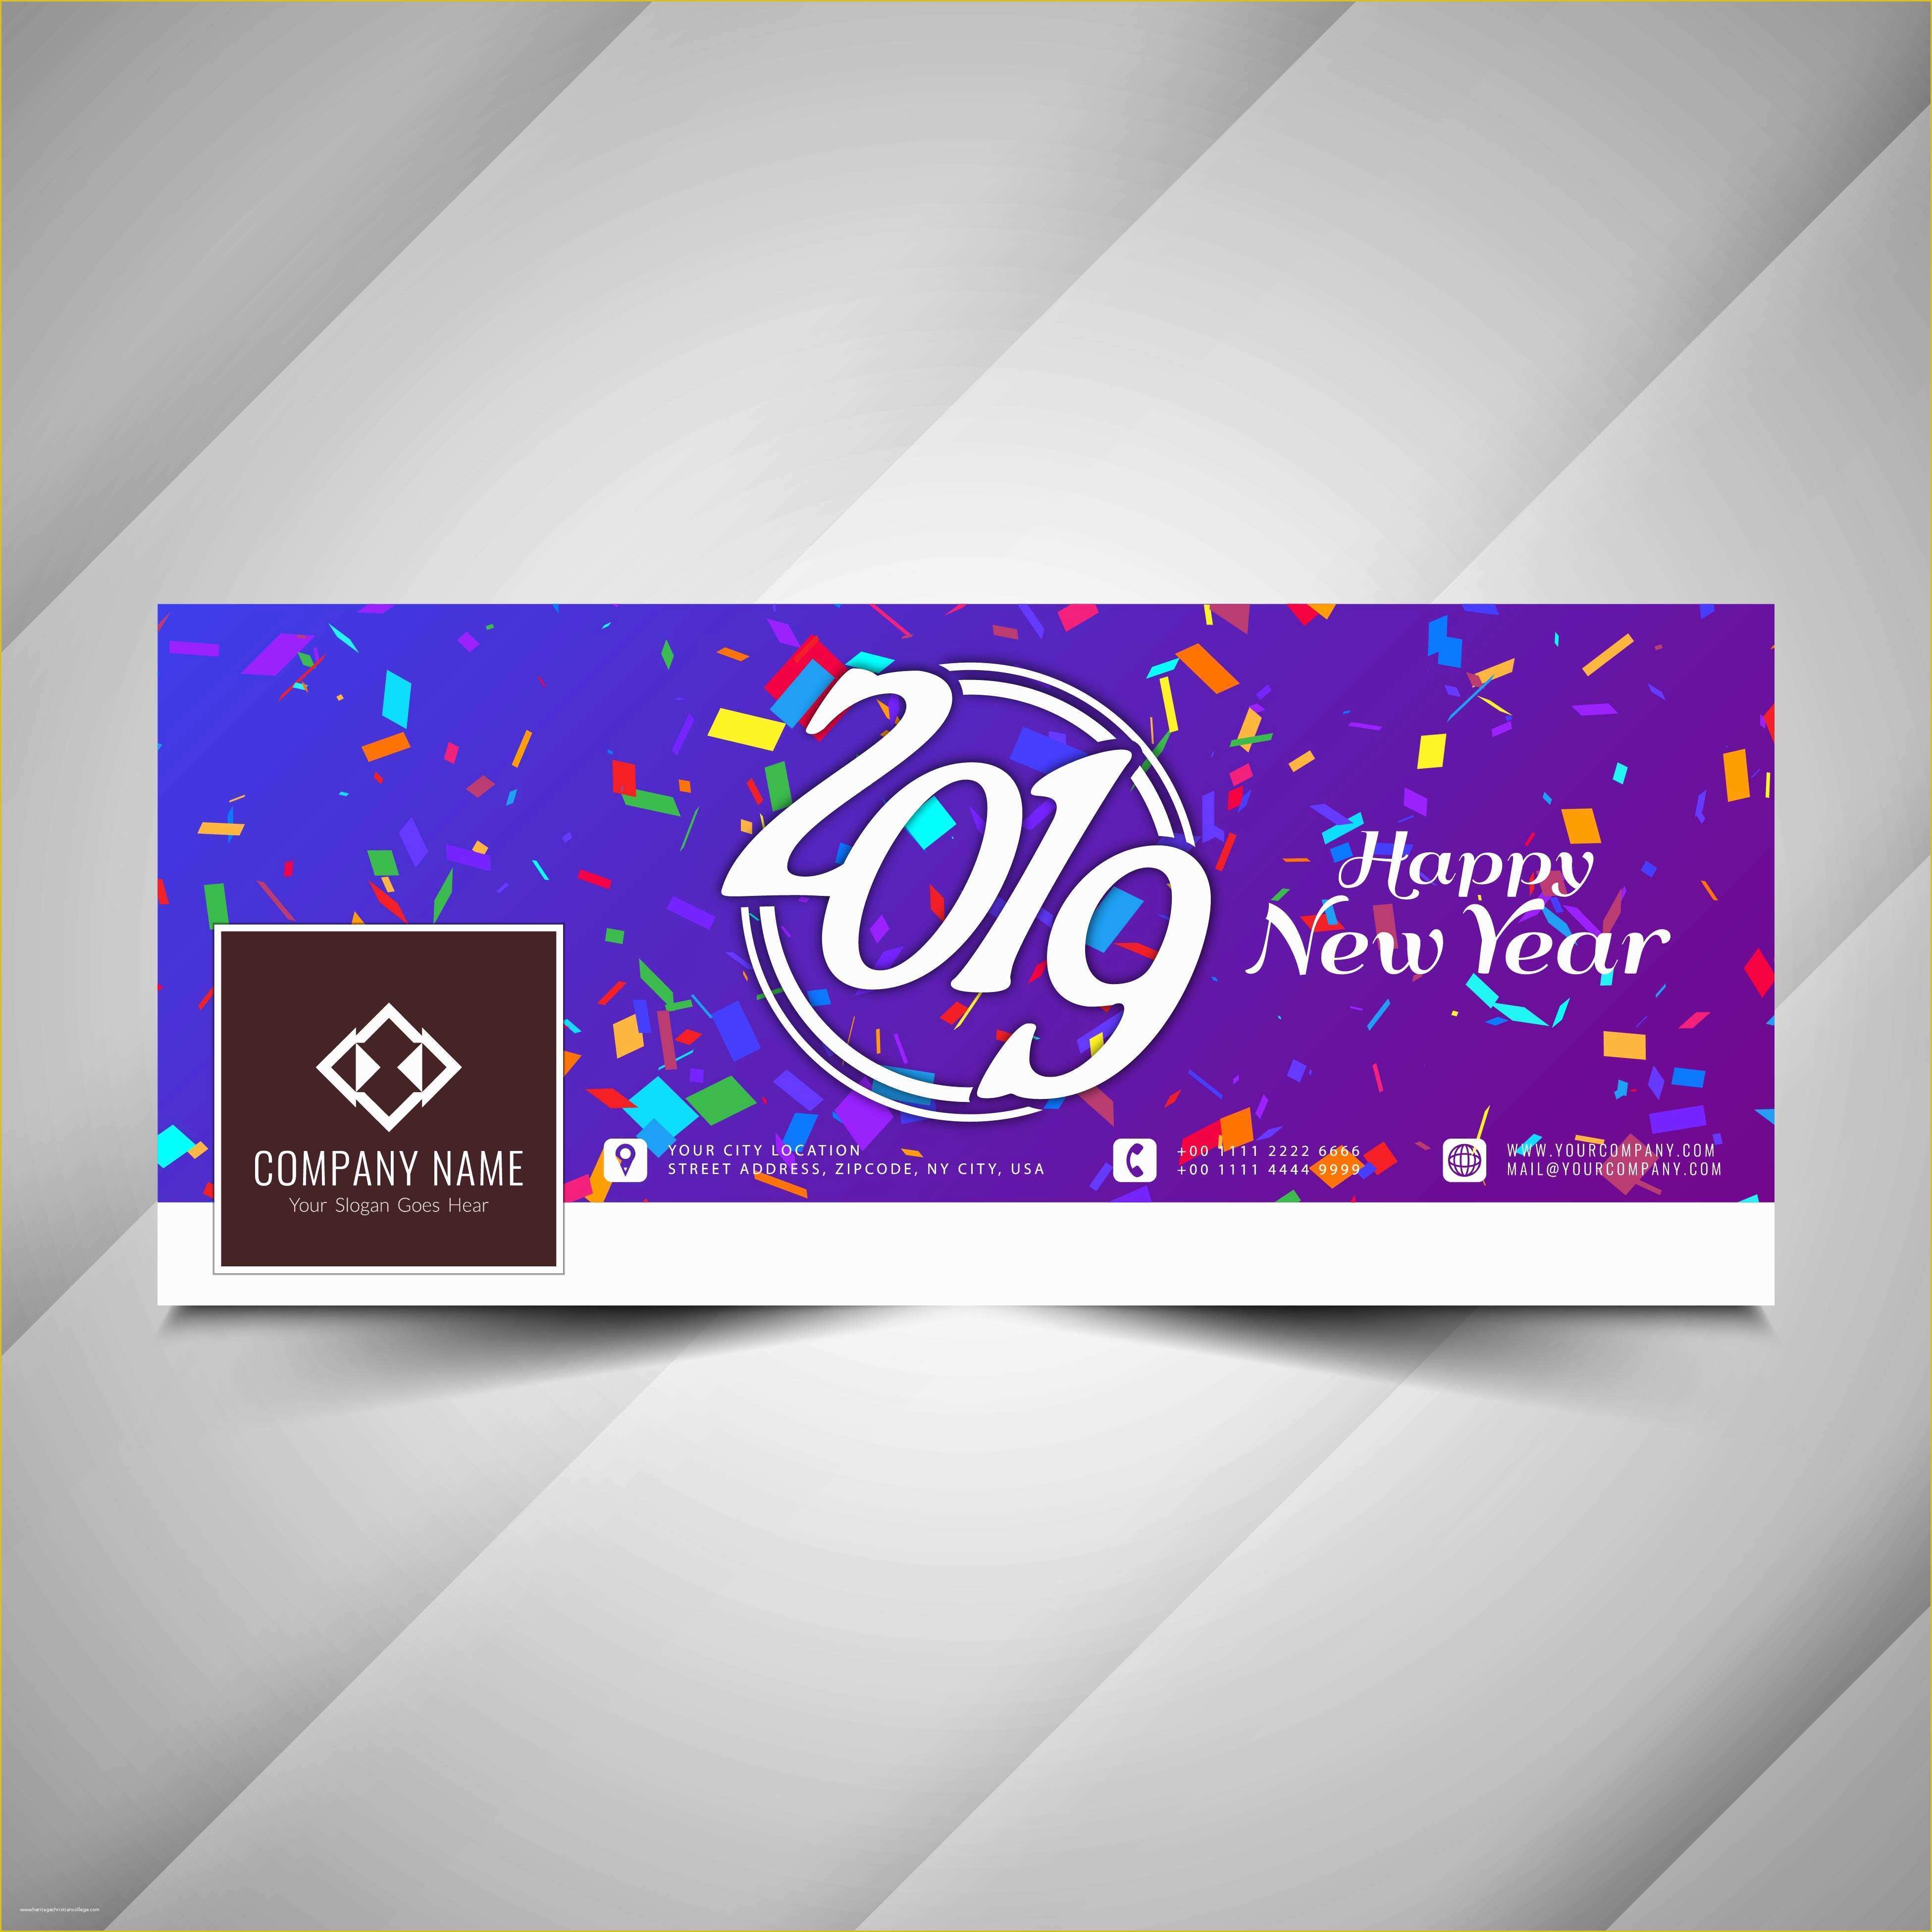 Social Media Banner Templates Free Of New Year 2019 social Media Colorful Banner Template